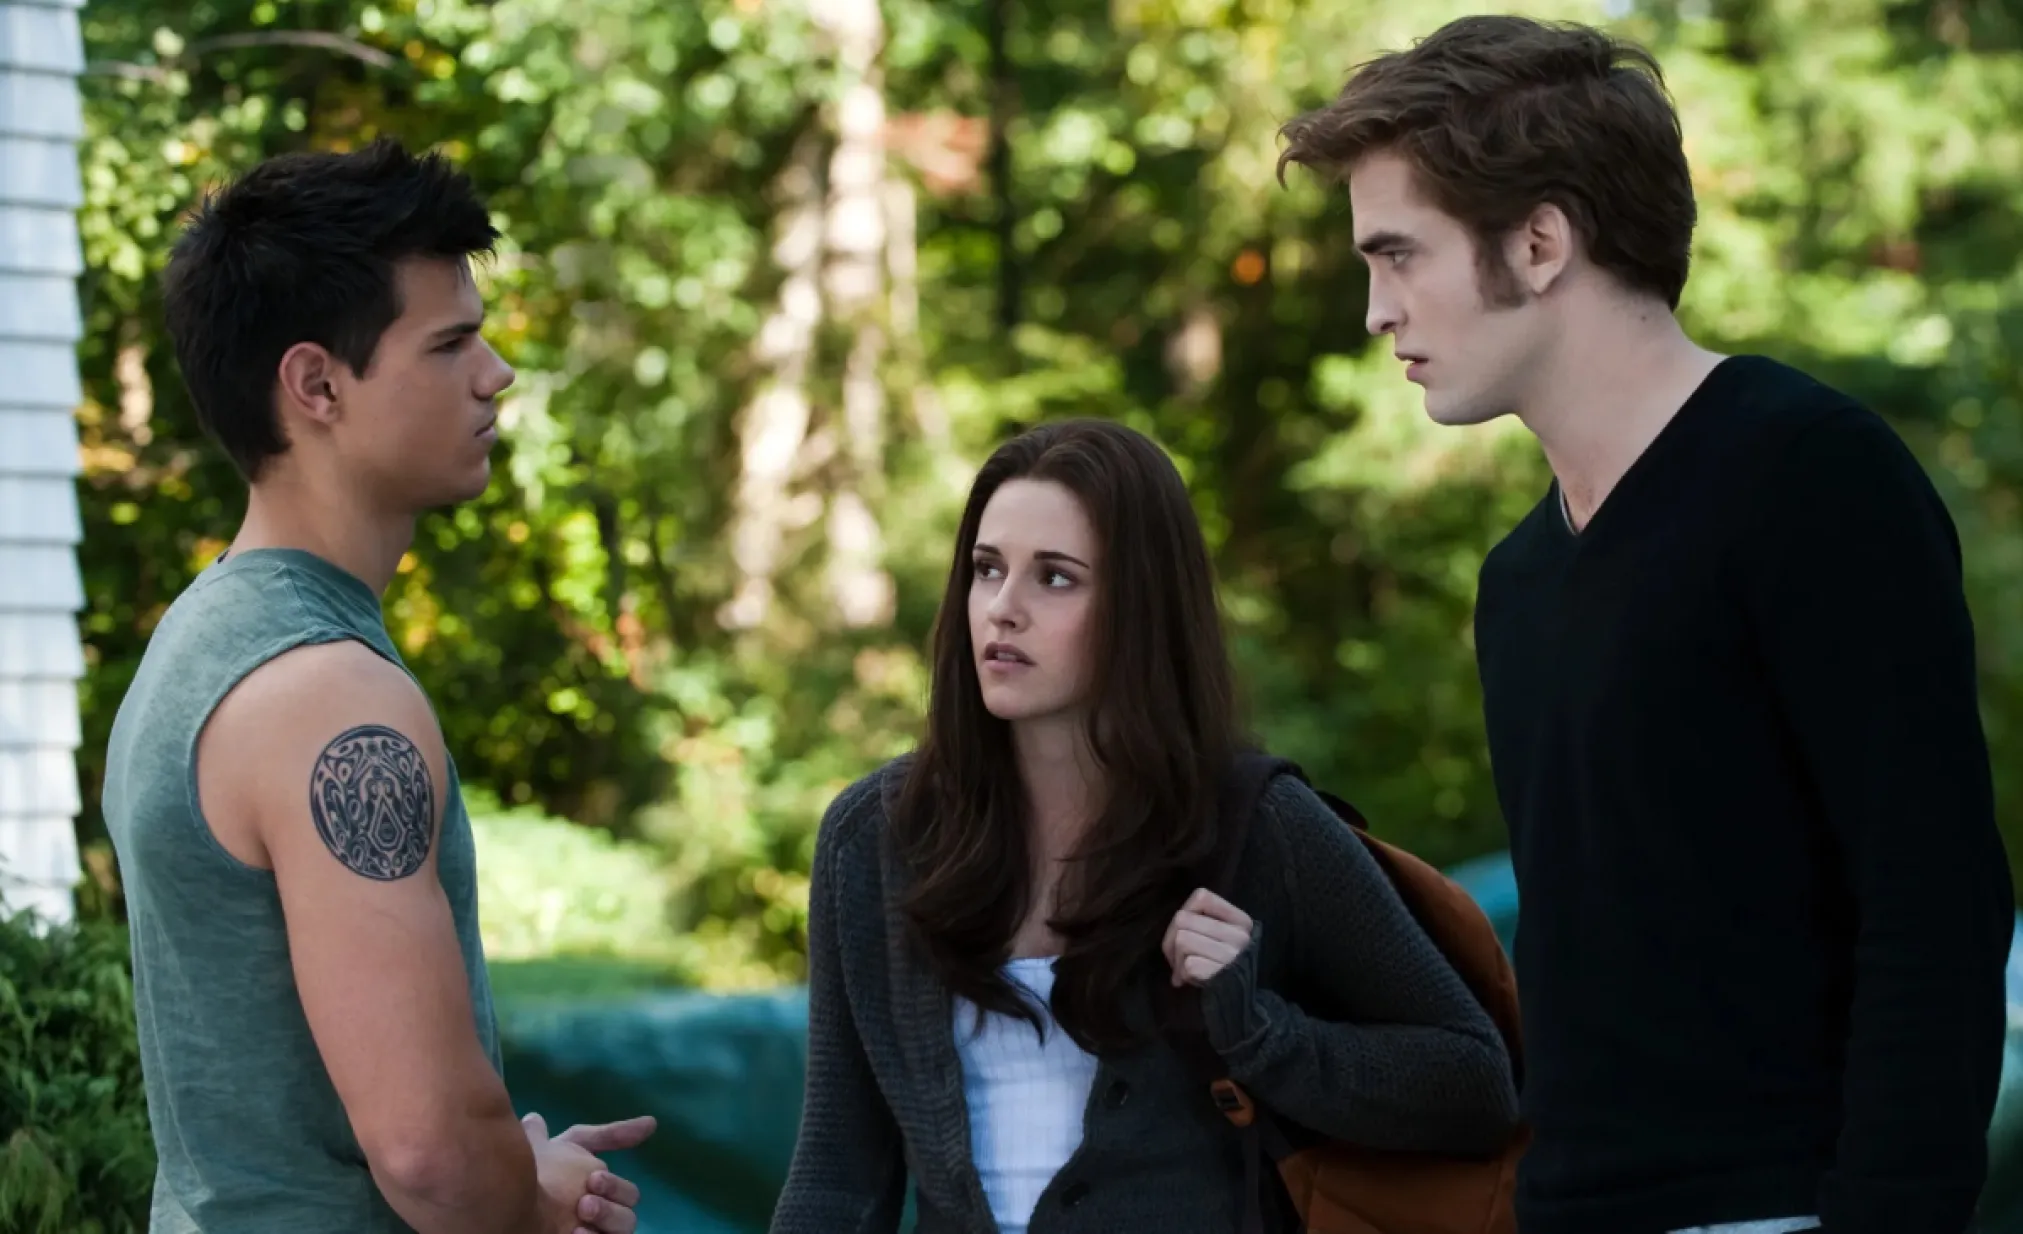 Edward Cullen and Jacob Black square up over Bella Swan in the third instalment of the Twilight Saga, Eclipse